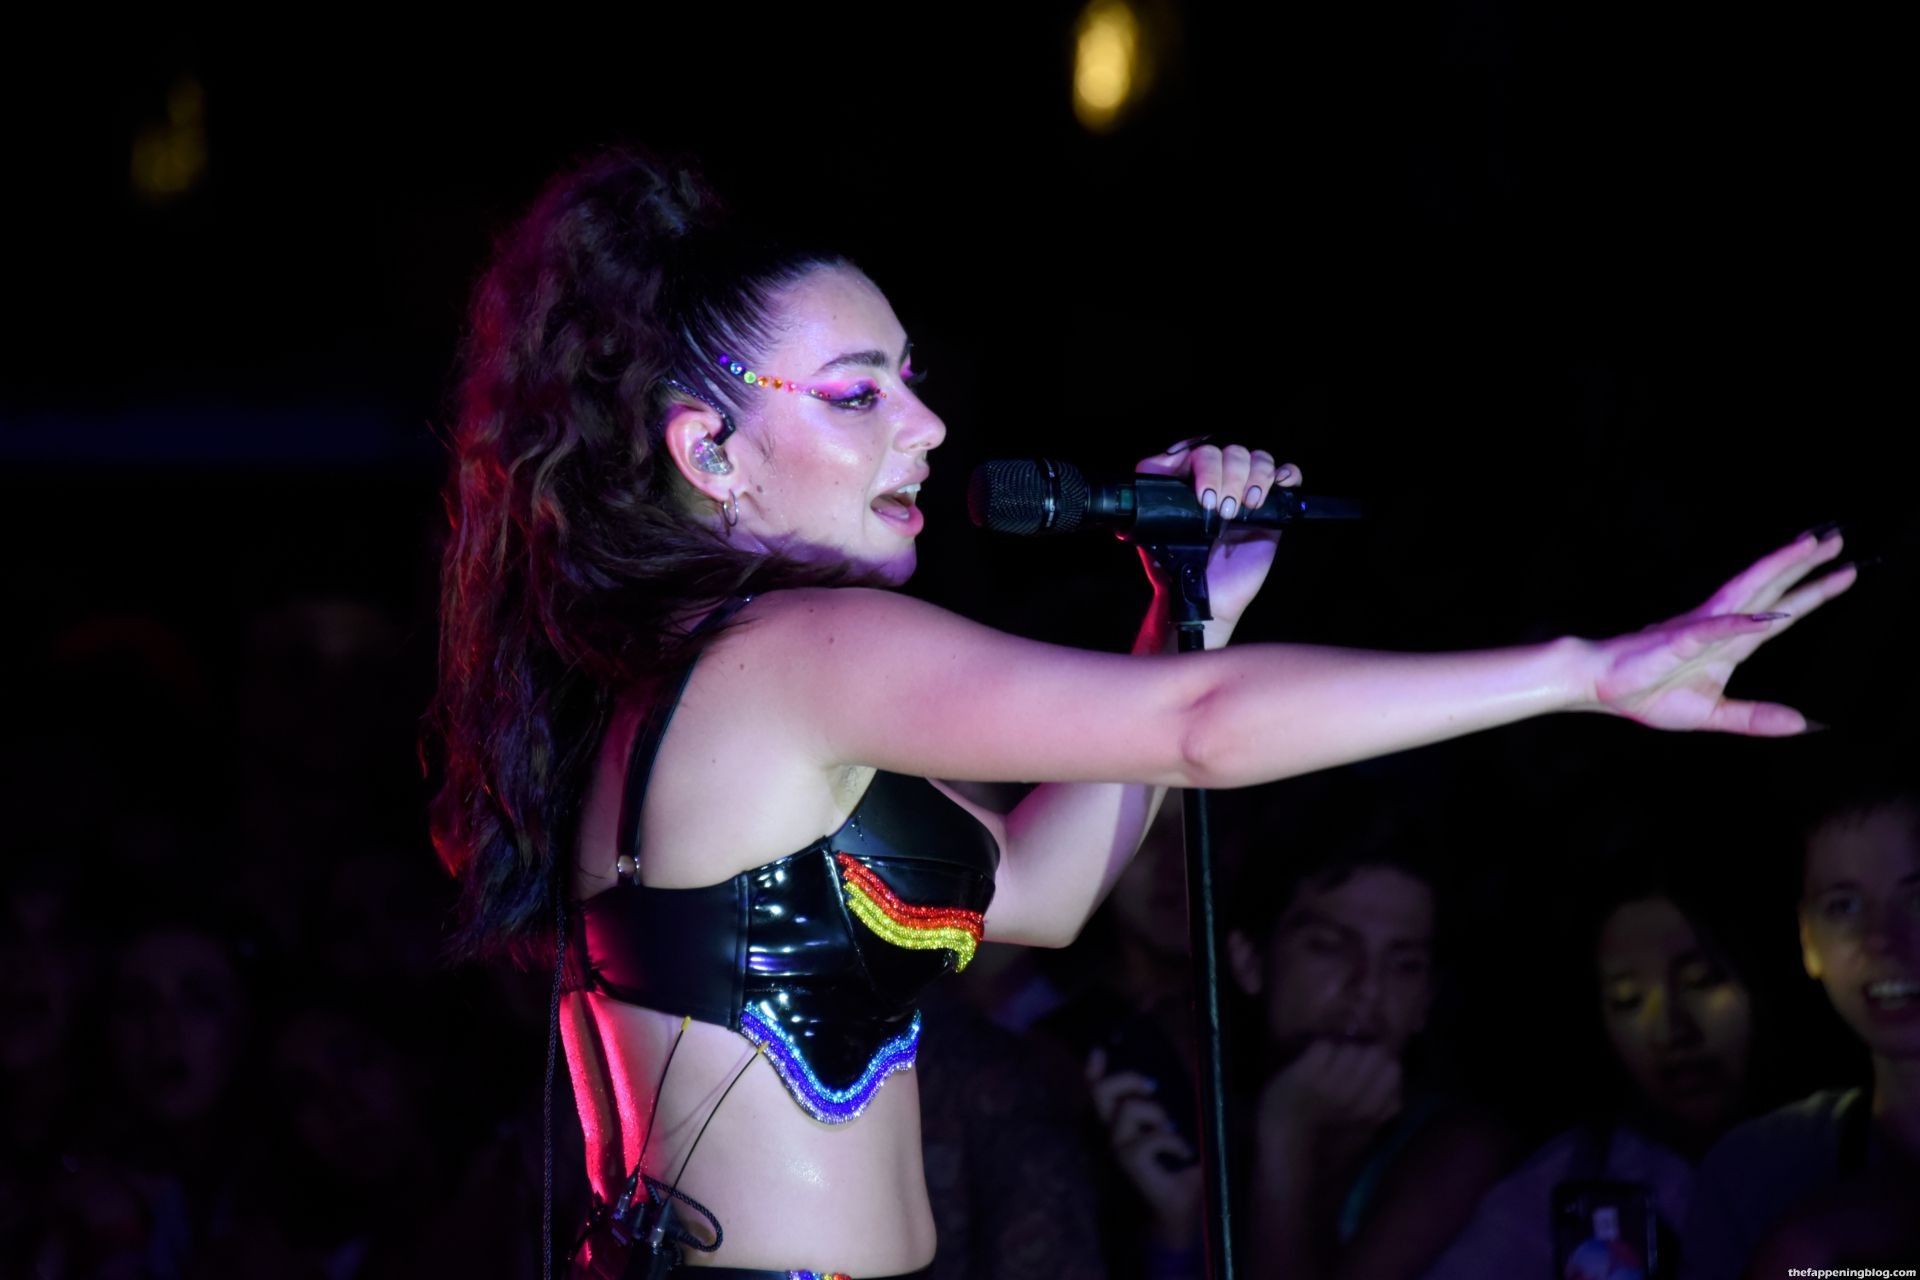 Charli-XCX-Sexy-on-Stage-5-thefappeningblog.com_.jpg